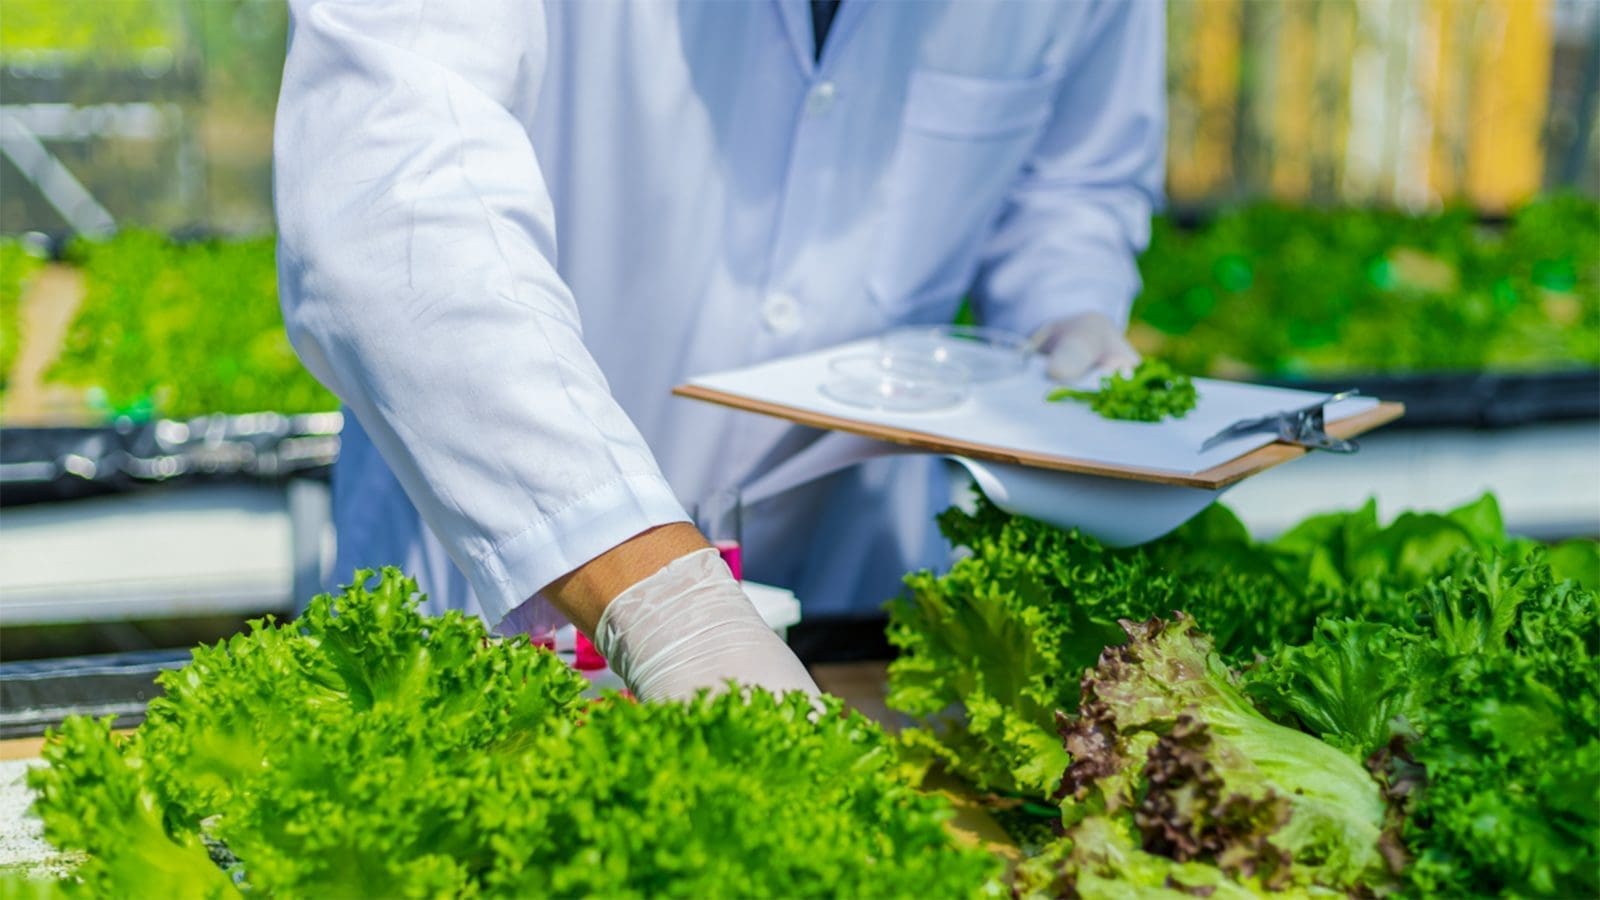 Research shows reinforcing current food safety laws can enhance produce safety along supply chain